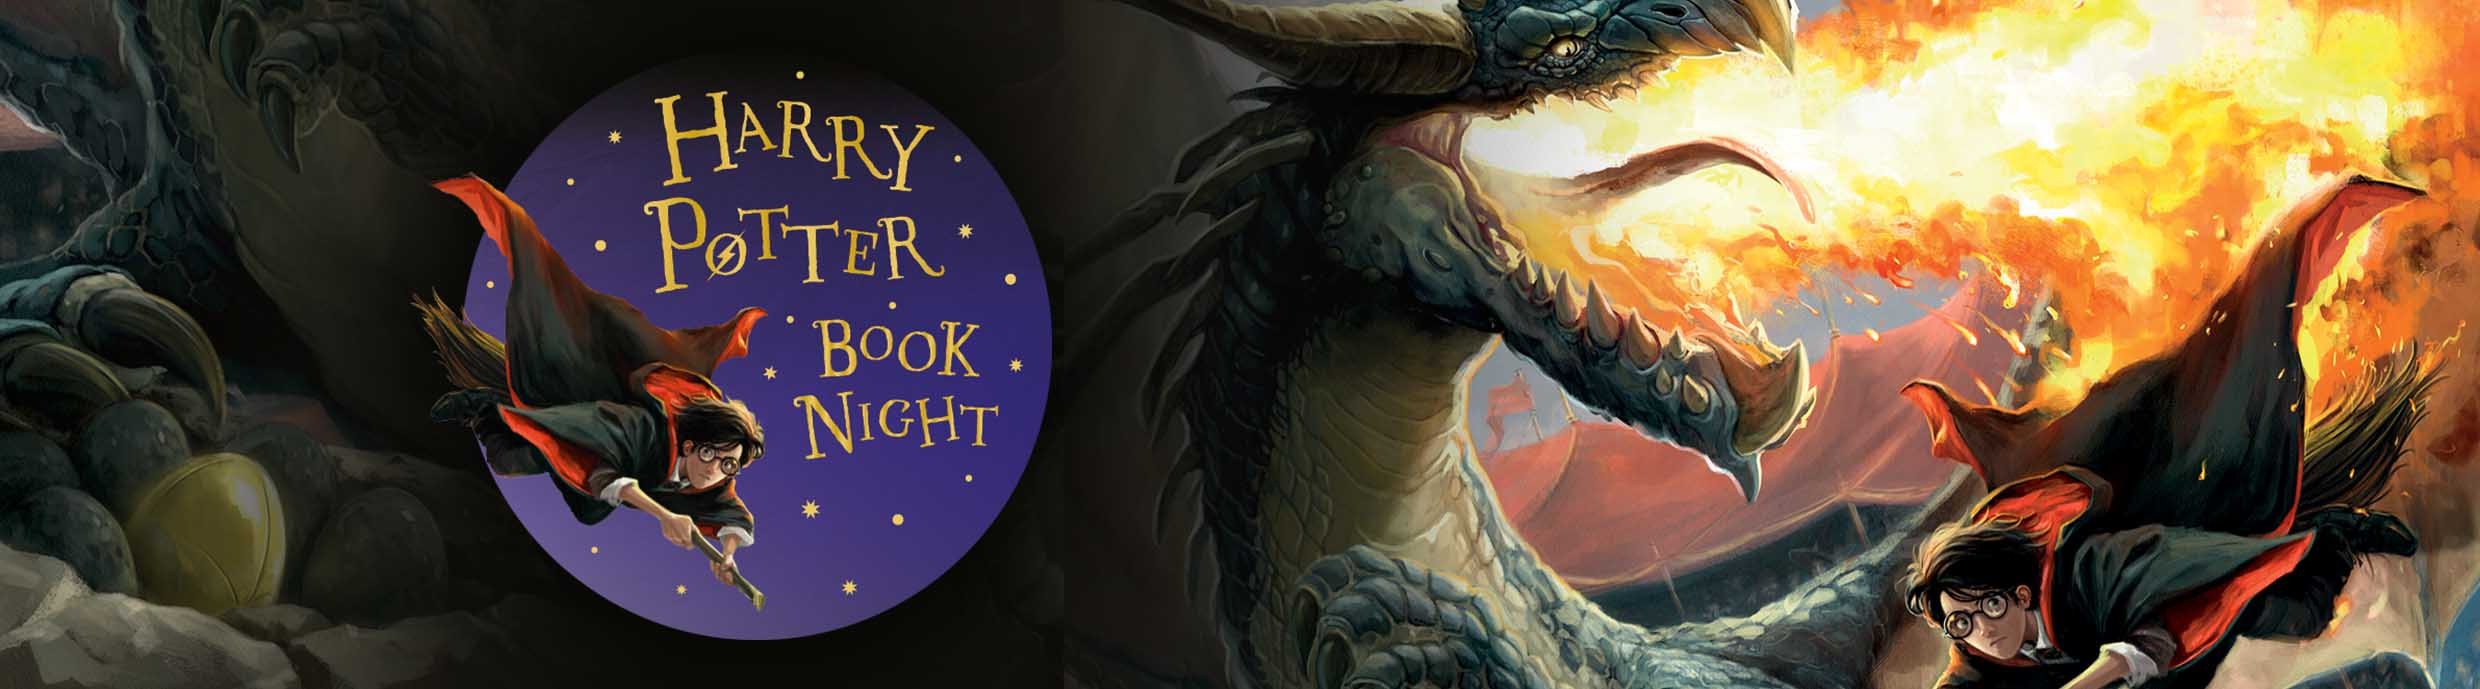 Harry Potter Book Night Events